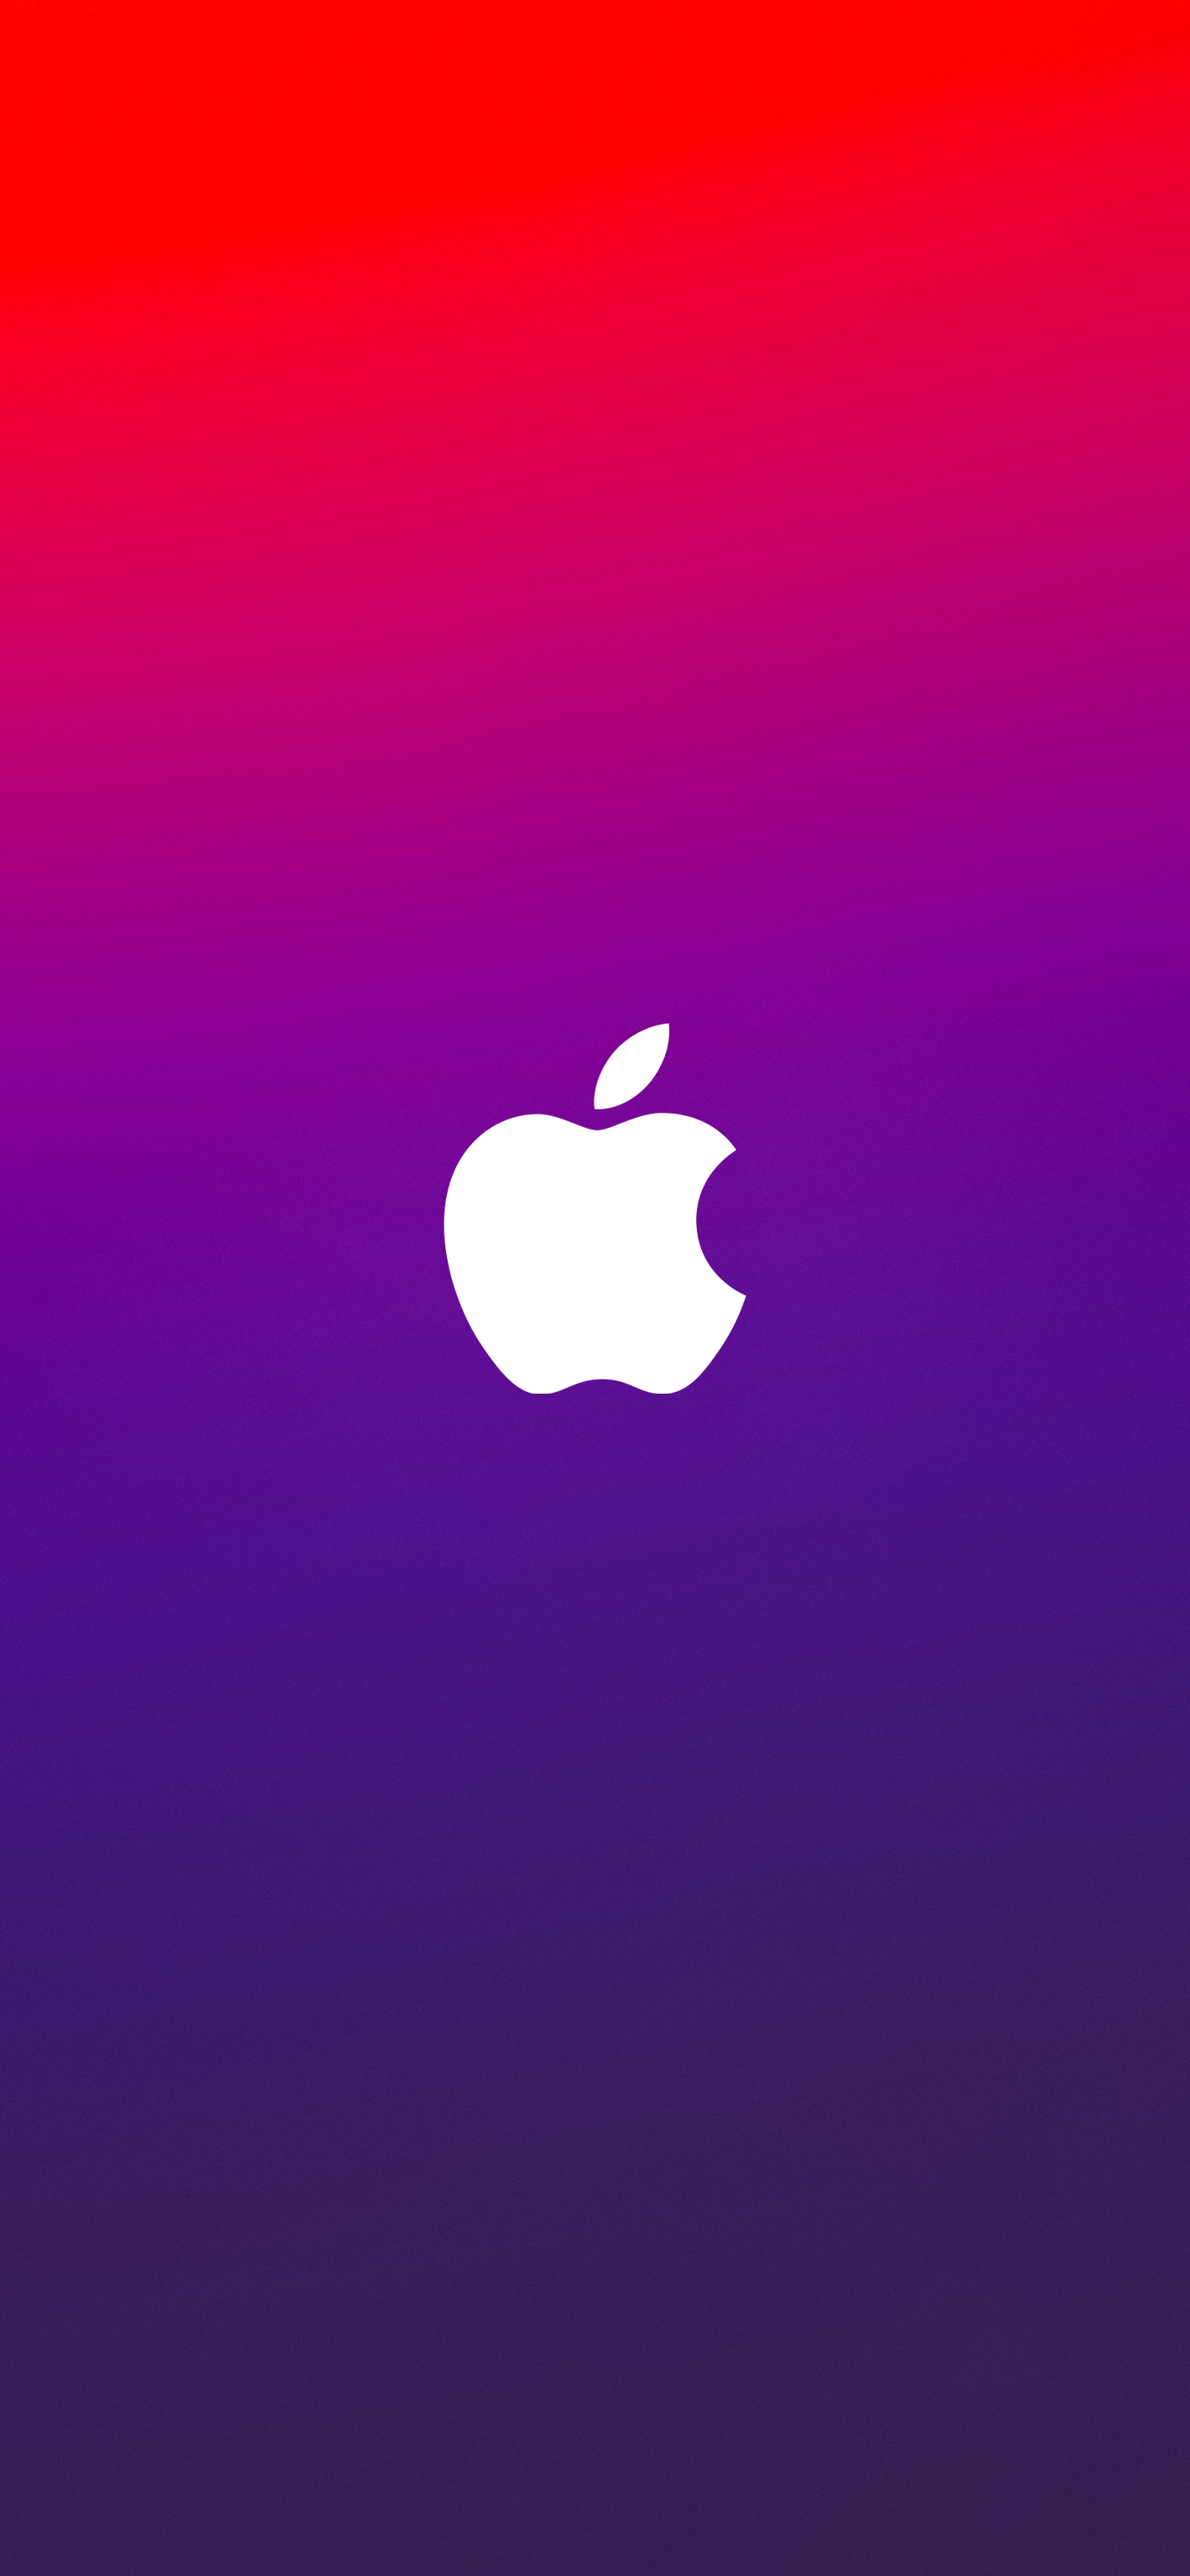 1419x3072 Colorful gradient Apple logo wallpapers for iPhone